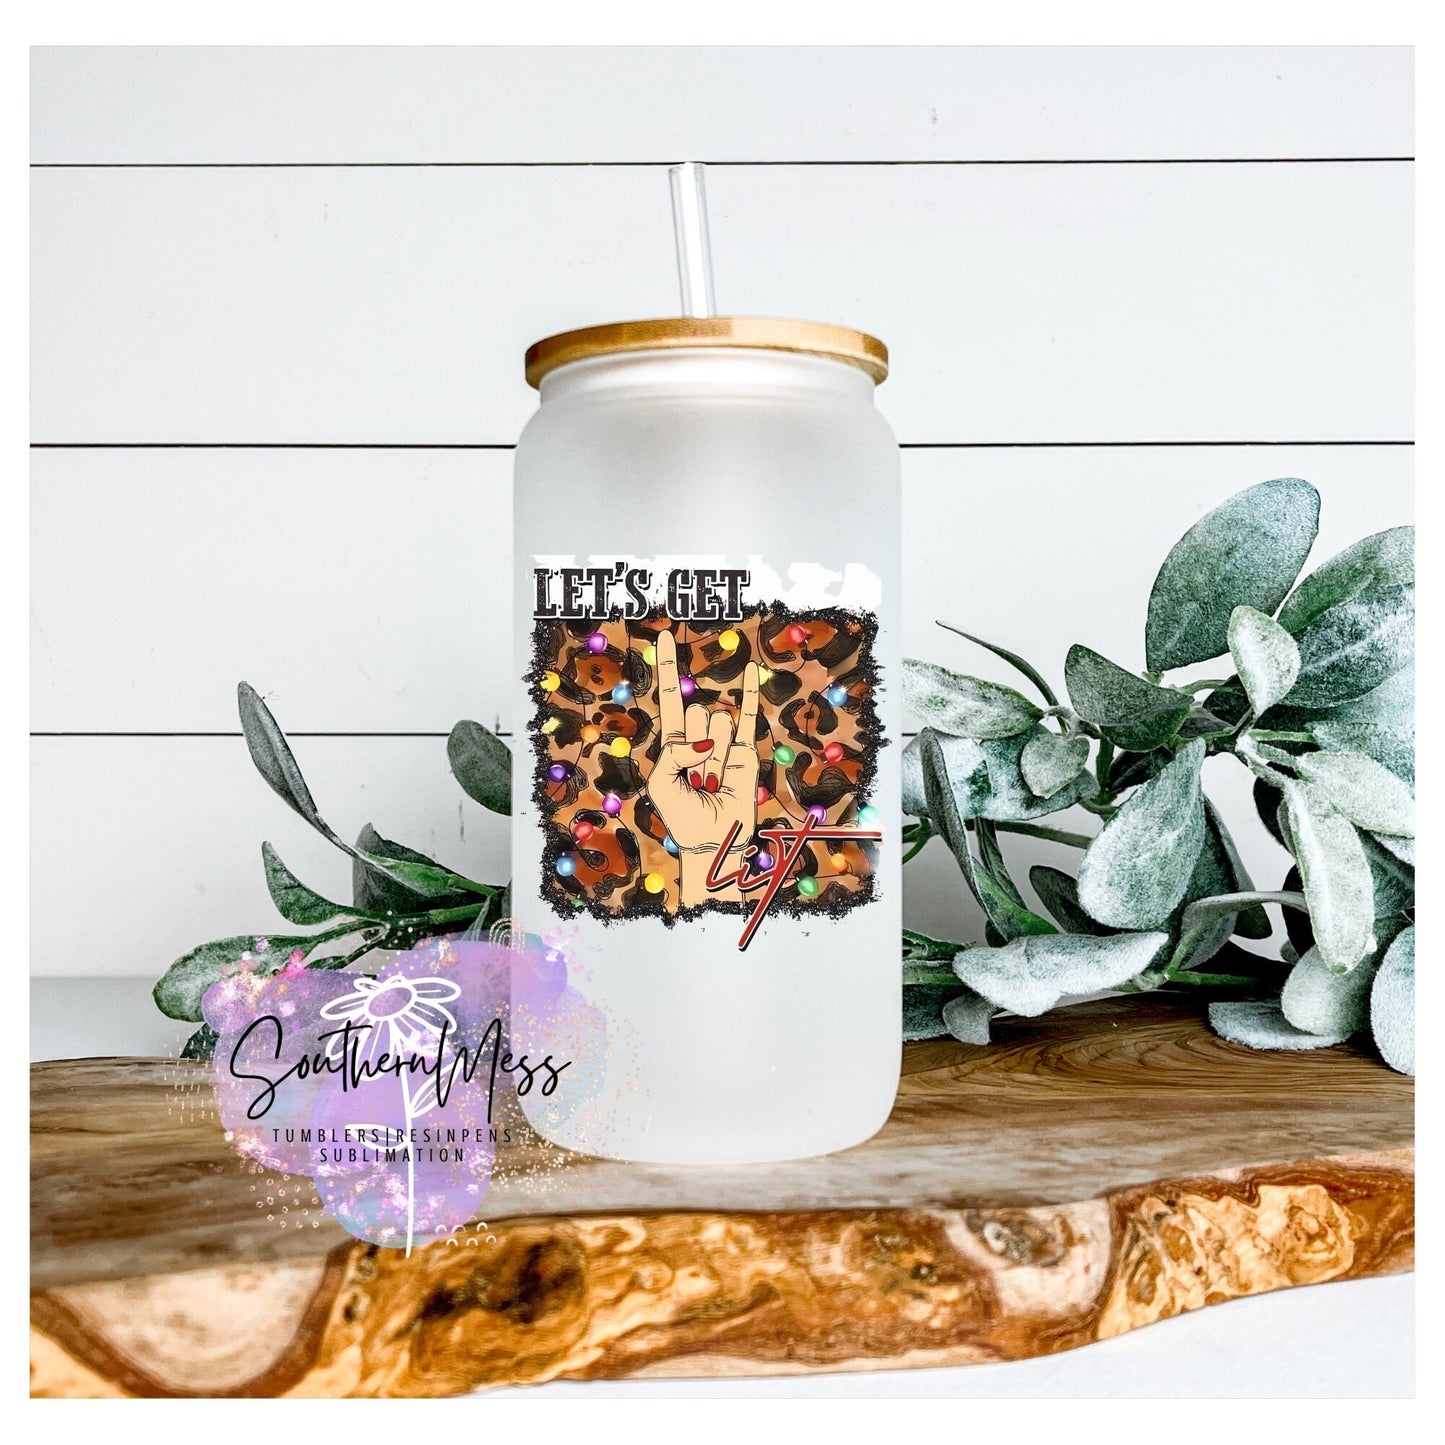 Customized Frosted Sublimation Glass Cups with Bamboo Lids and